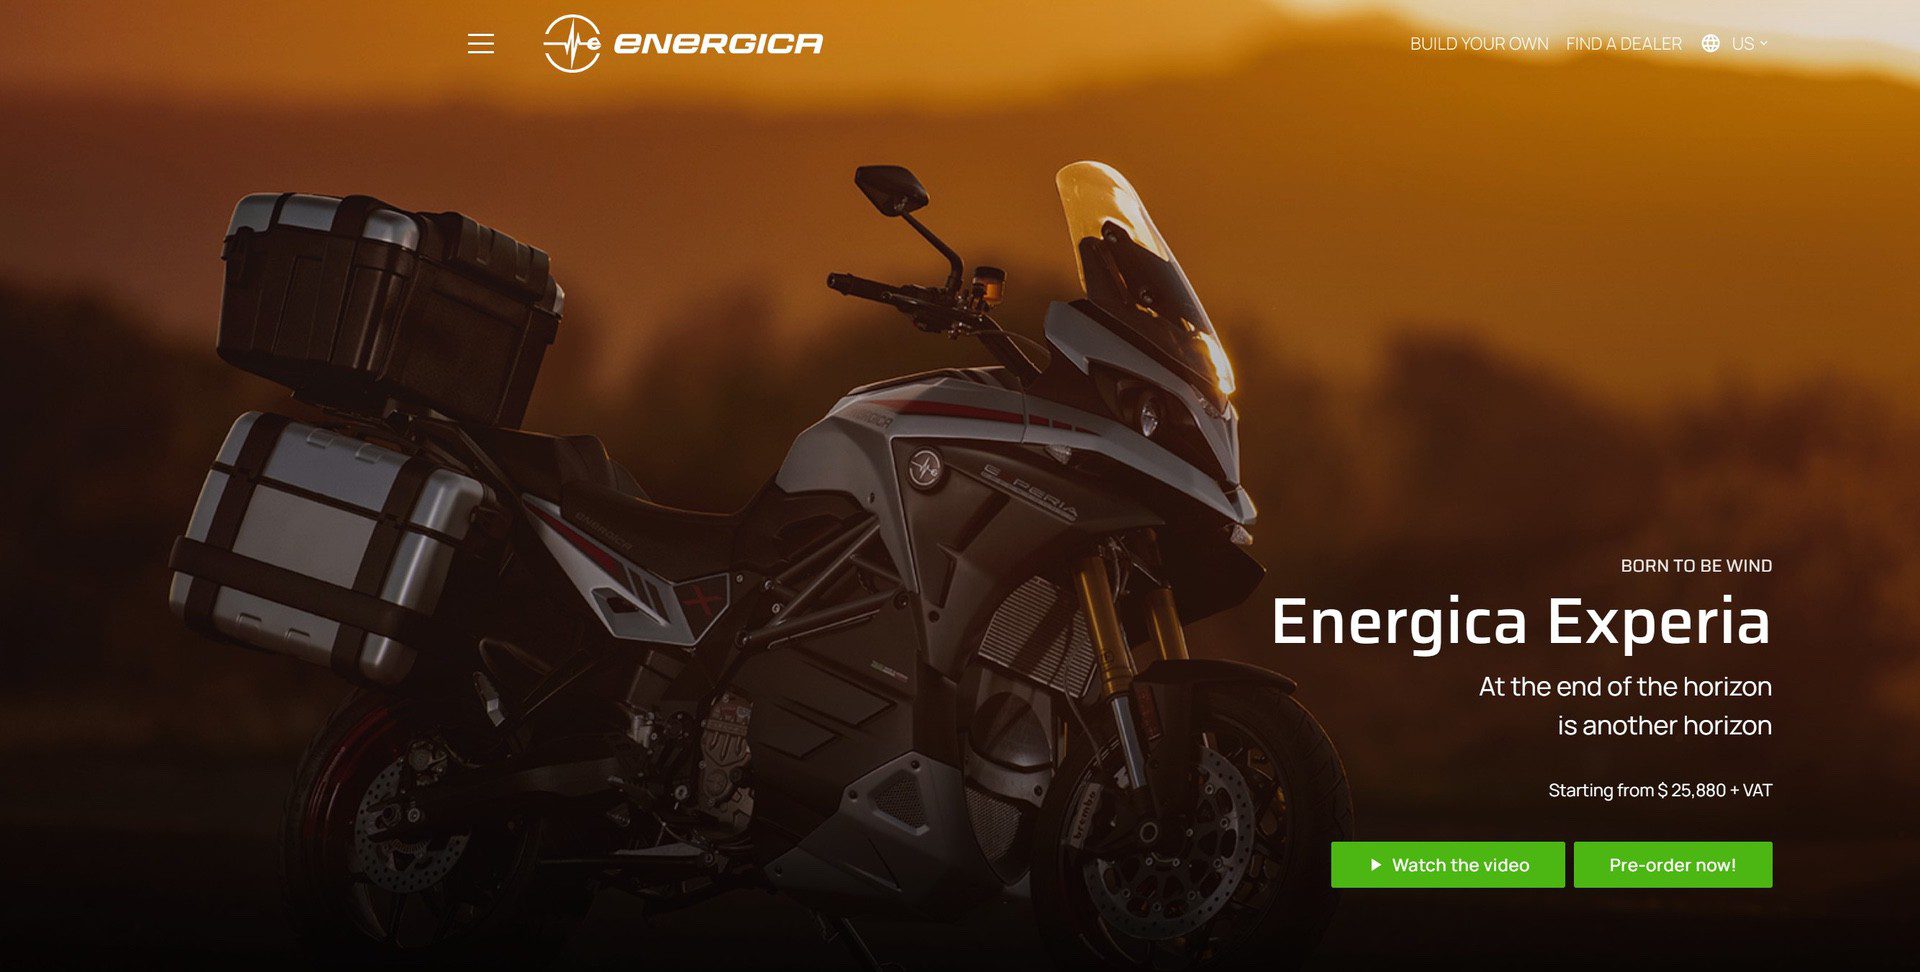 Product page image for Energica Experia